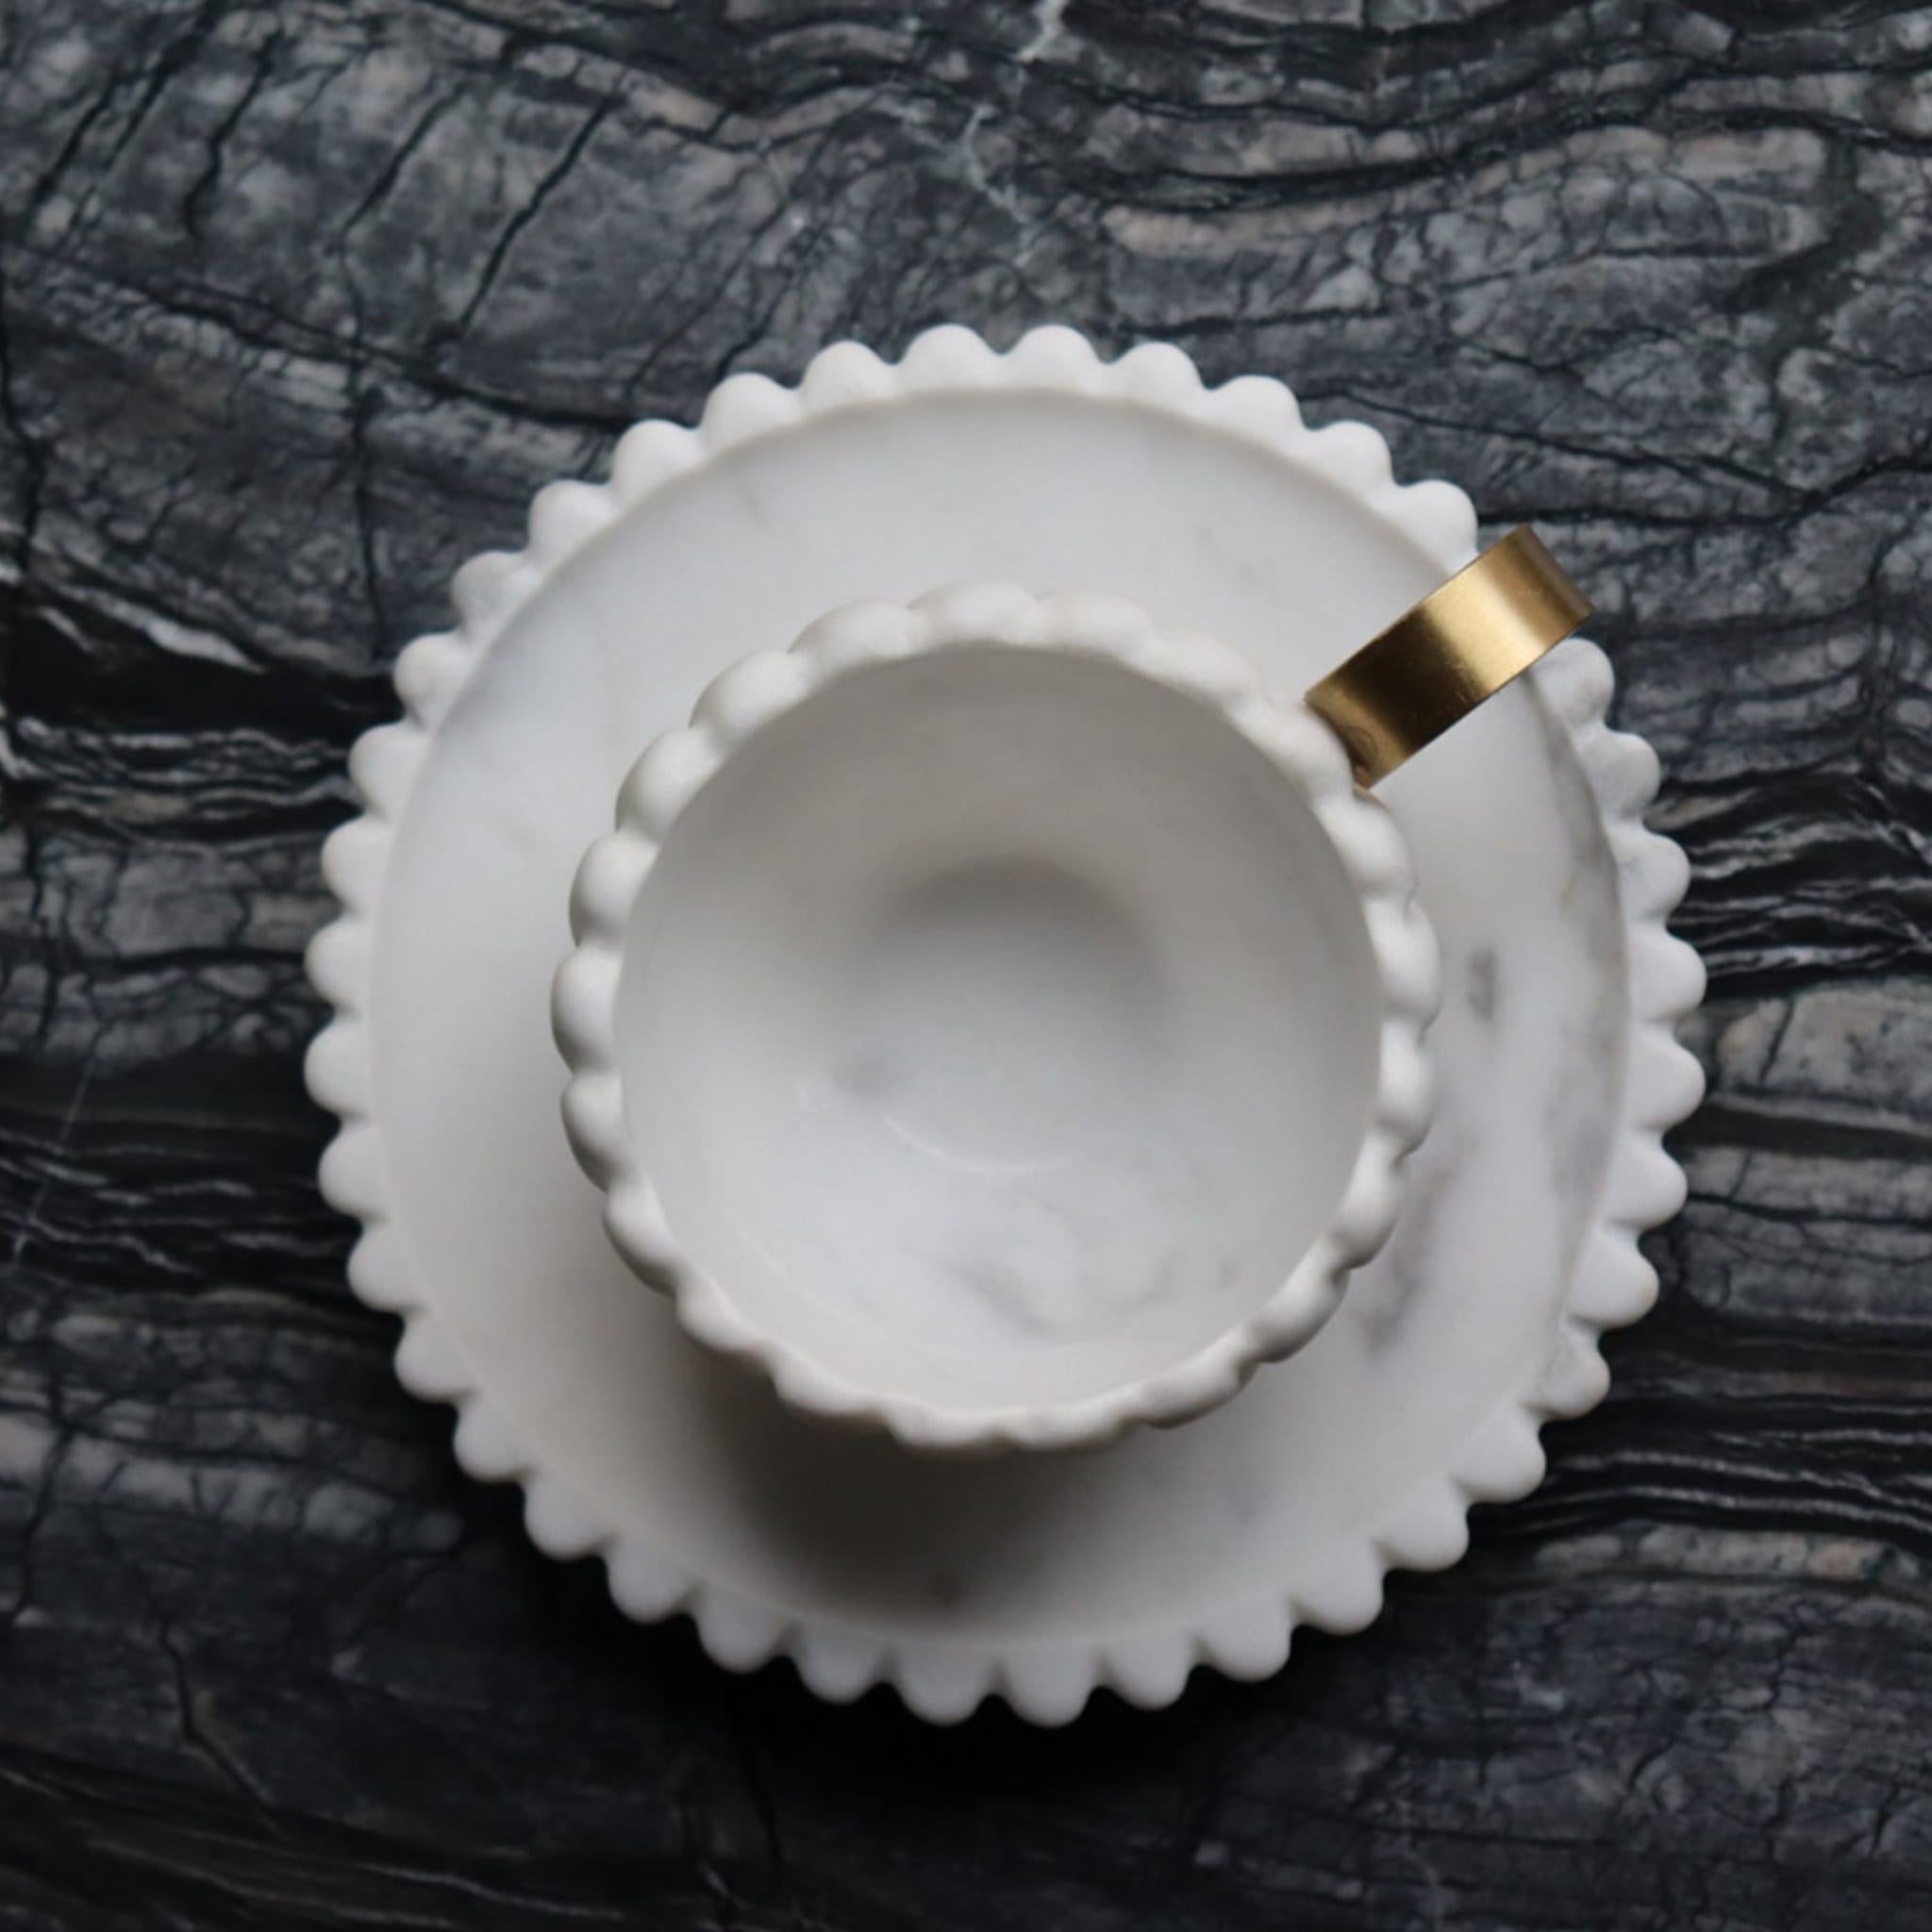 Italian Victoria Teacup and Saucer Set by Bethan Gray For Sale